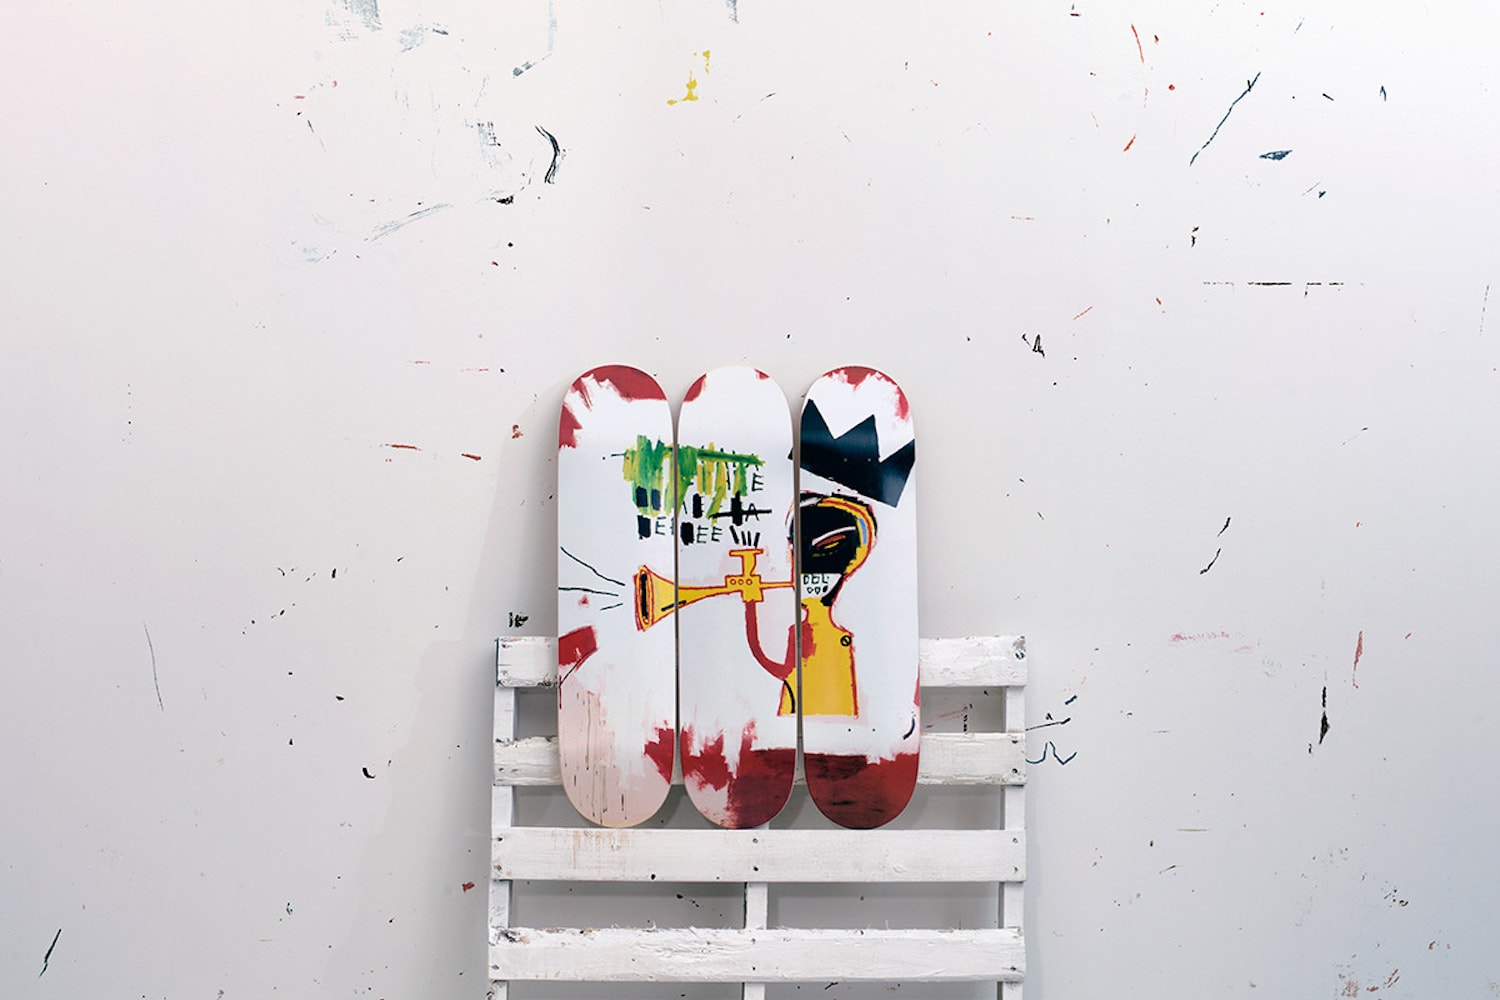 The skateroom jean michel basquiat second collection skateboards